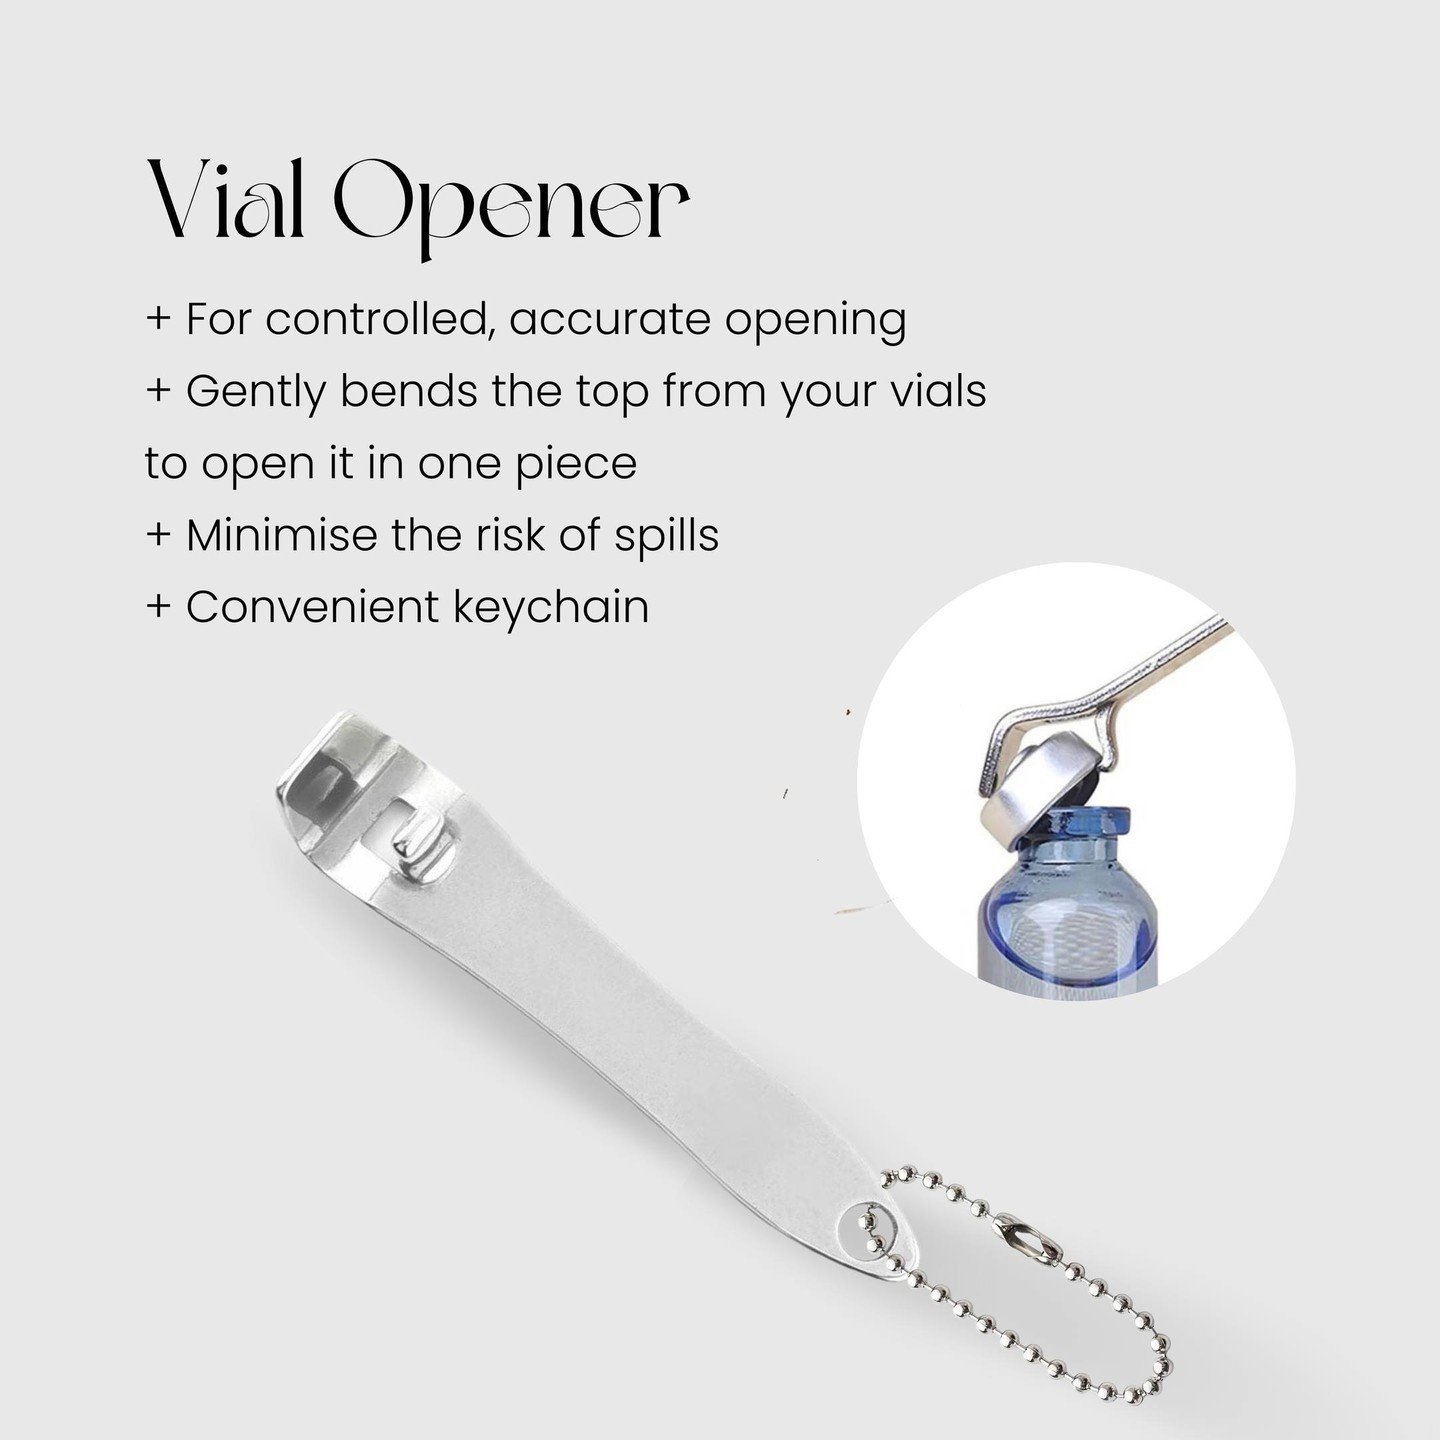 An essential tool for any aesthetic practitioner, allowing them to safely and effectively open vials such as Botox and Dysport. The Vial Opener has been specifically designed to provide convenience and precision during the preparation process.⁠
Shop 